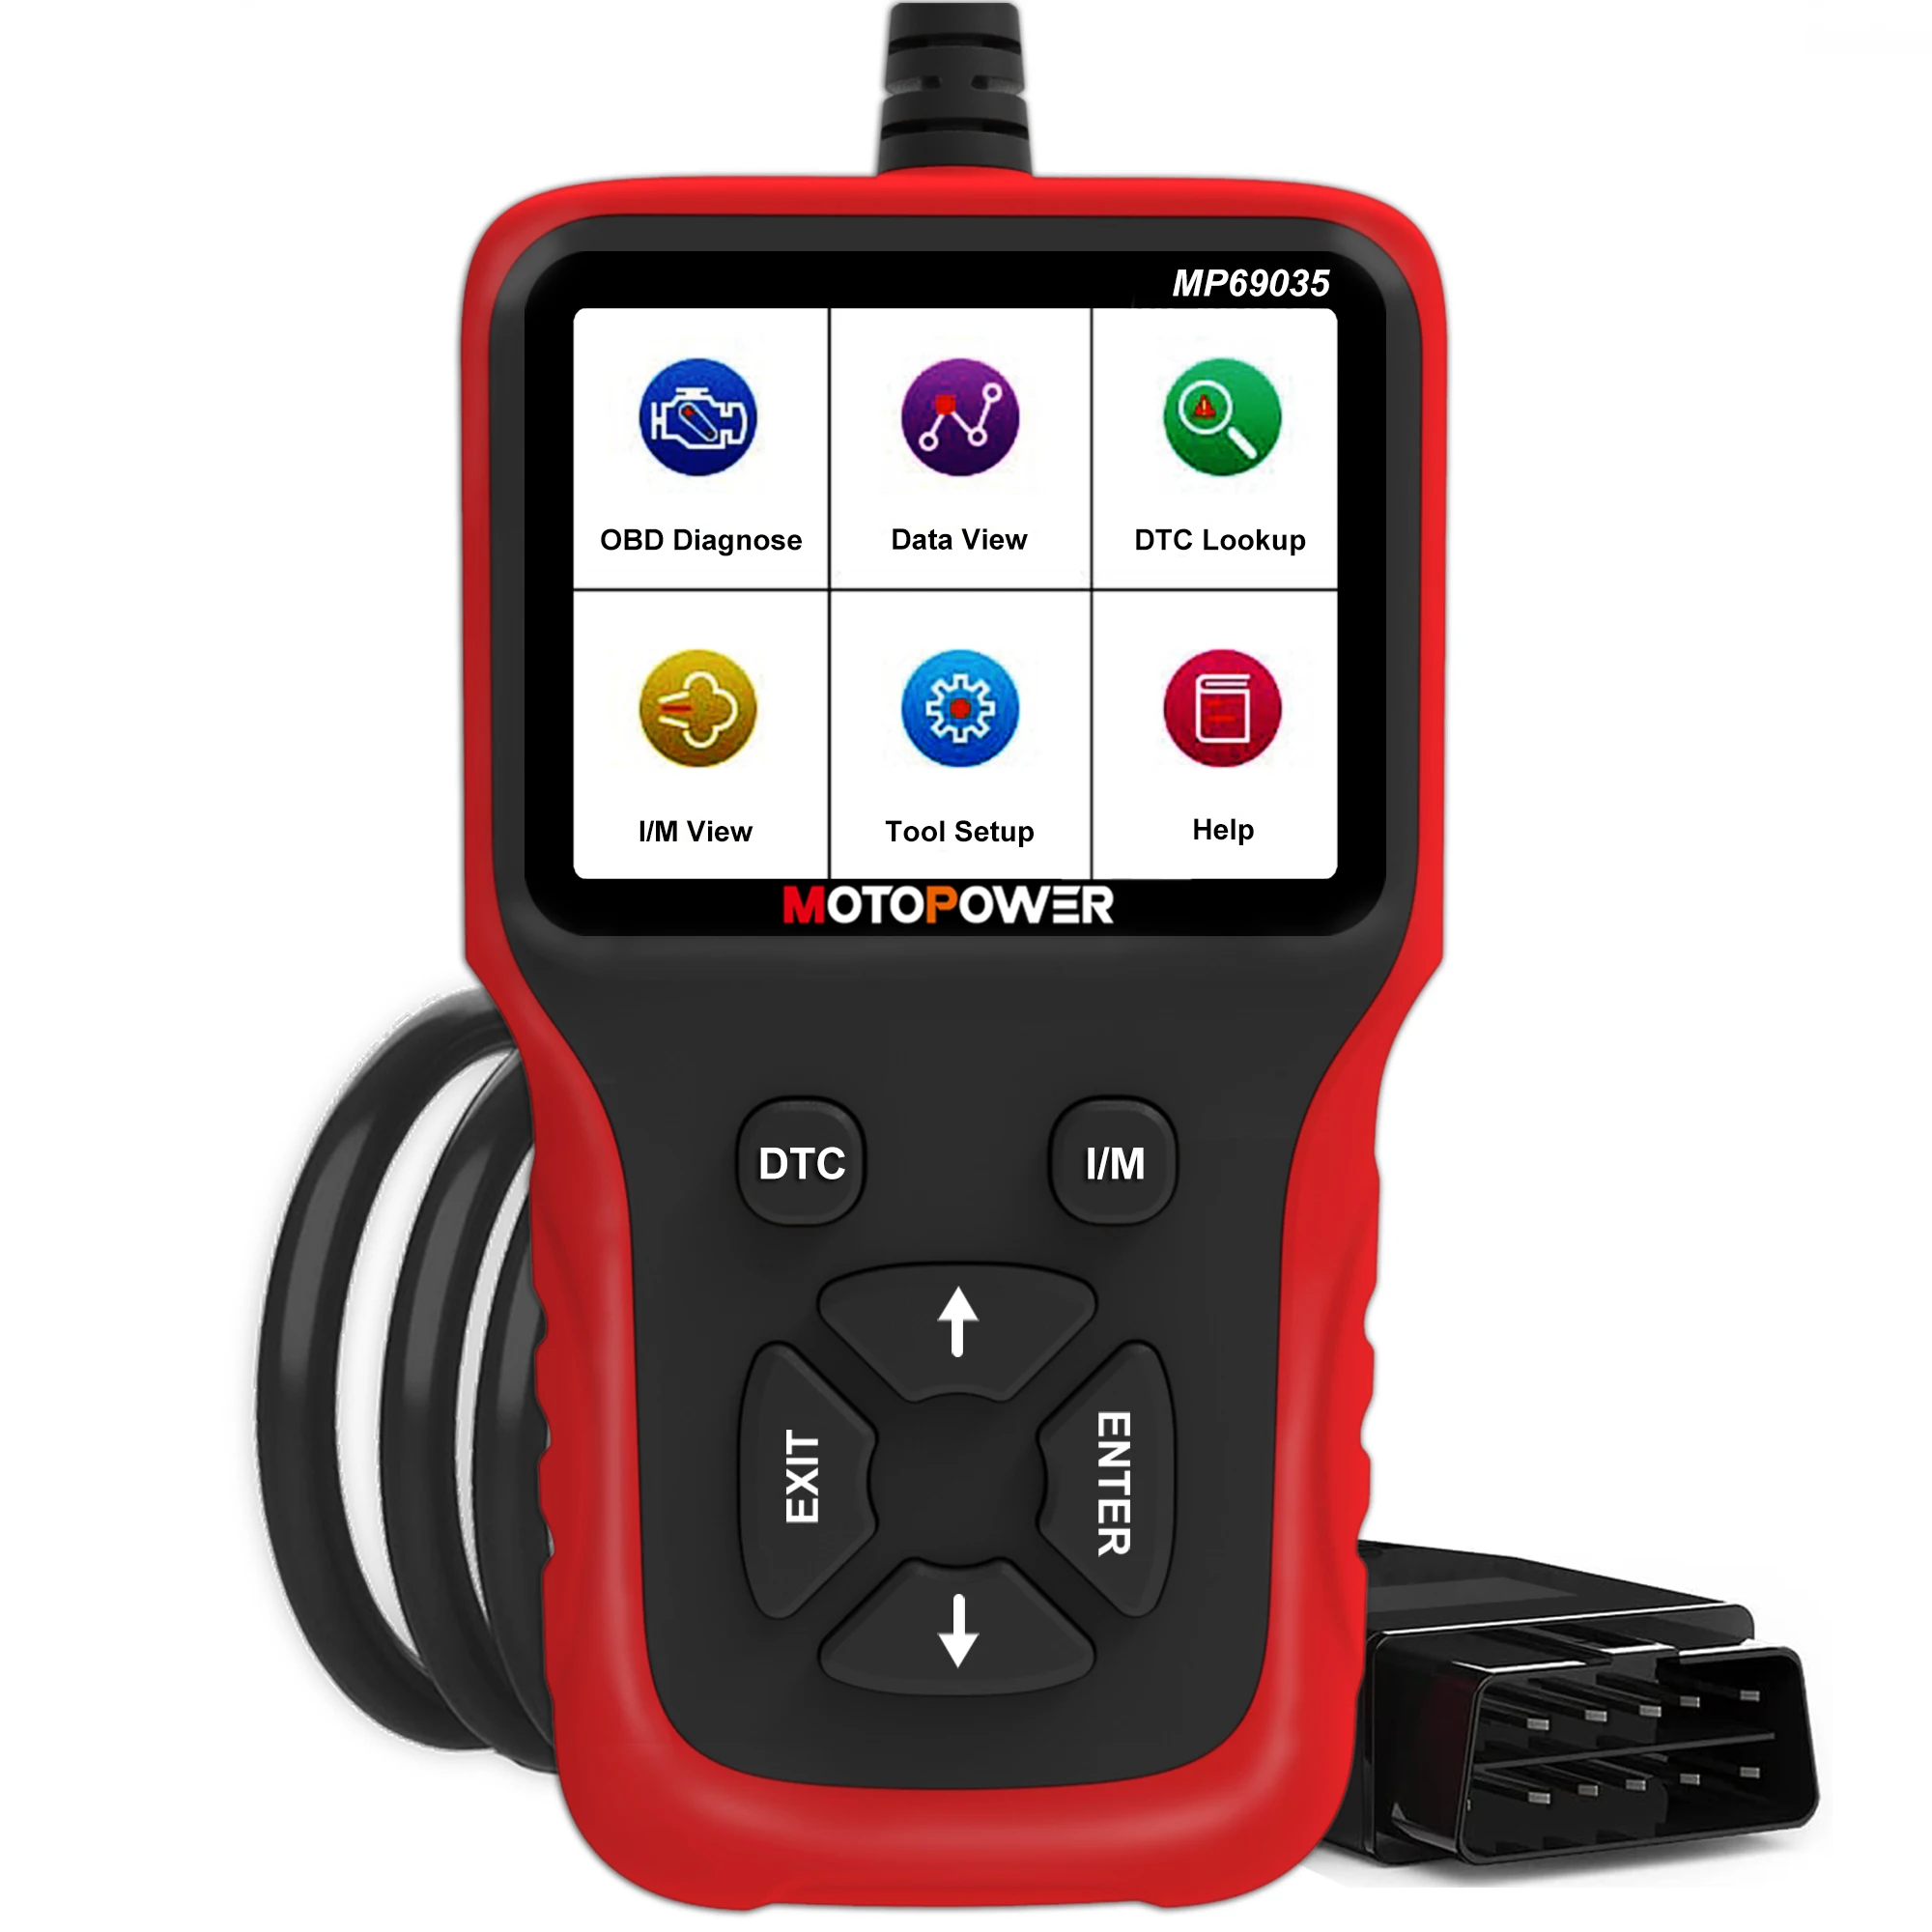 MOTOPOWER MP69035 OBD2 Scanner Universal Car Engine Fault Code Reader, CAN Diagnostic Scan Tool for All OBD II Protocol Cars